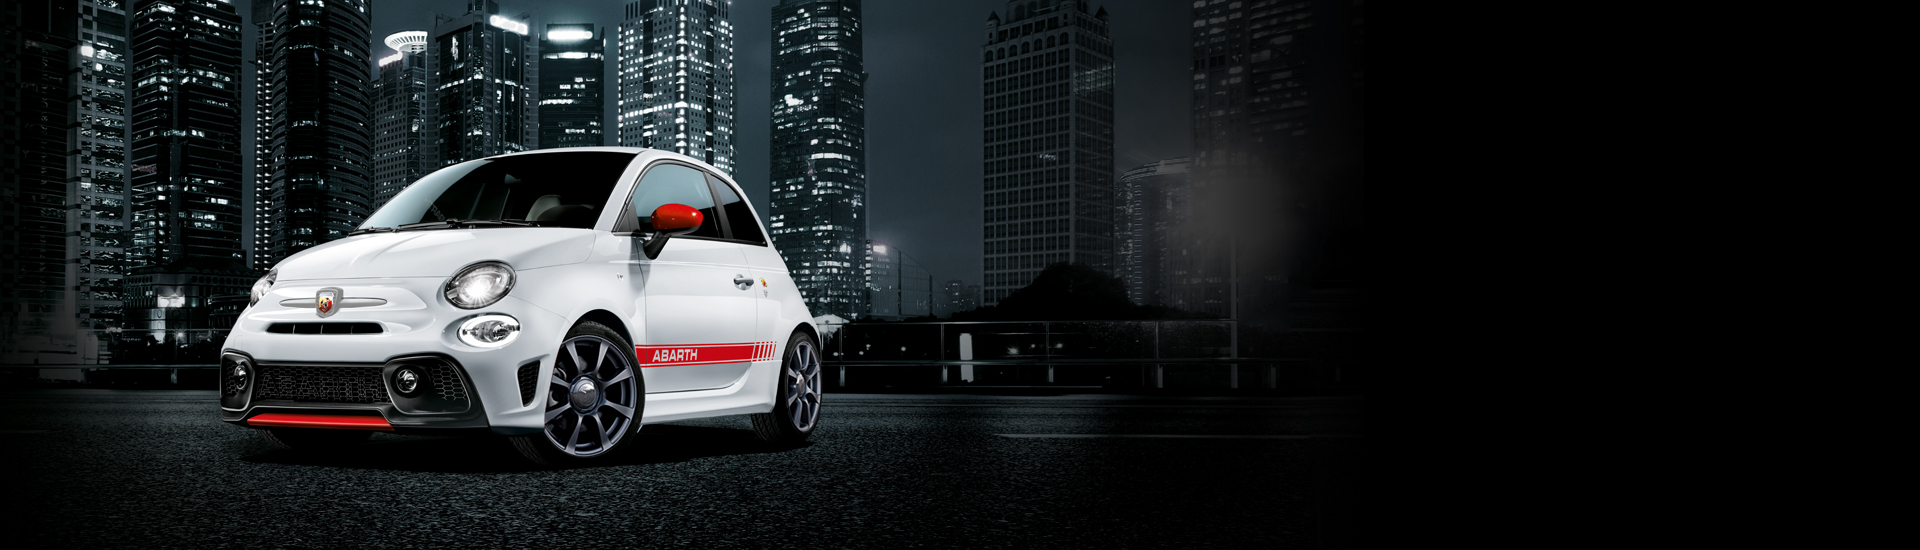 Latest Abarth brand-index Offers